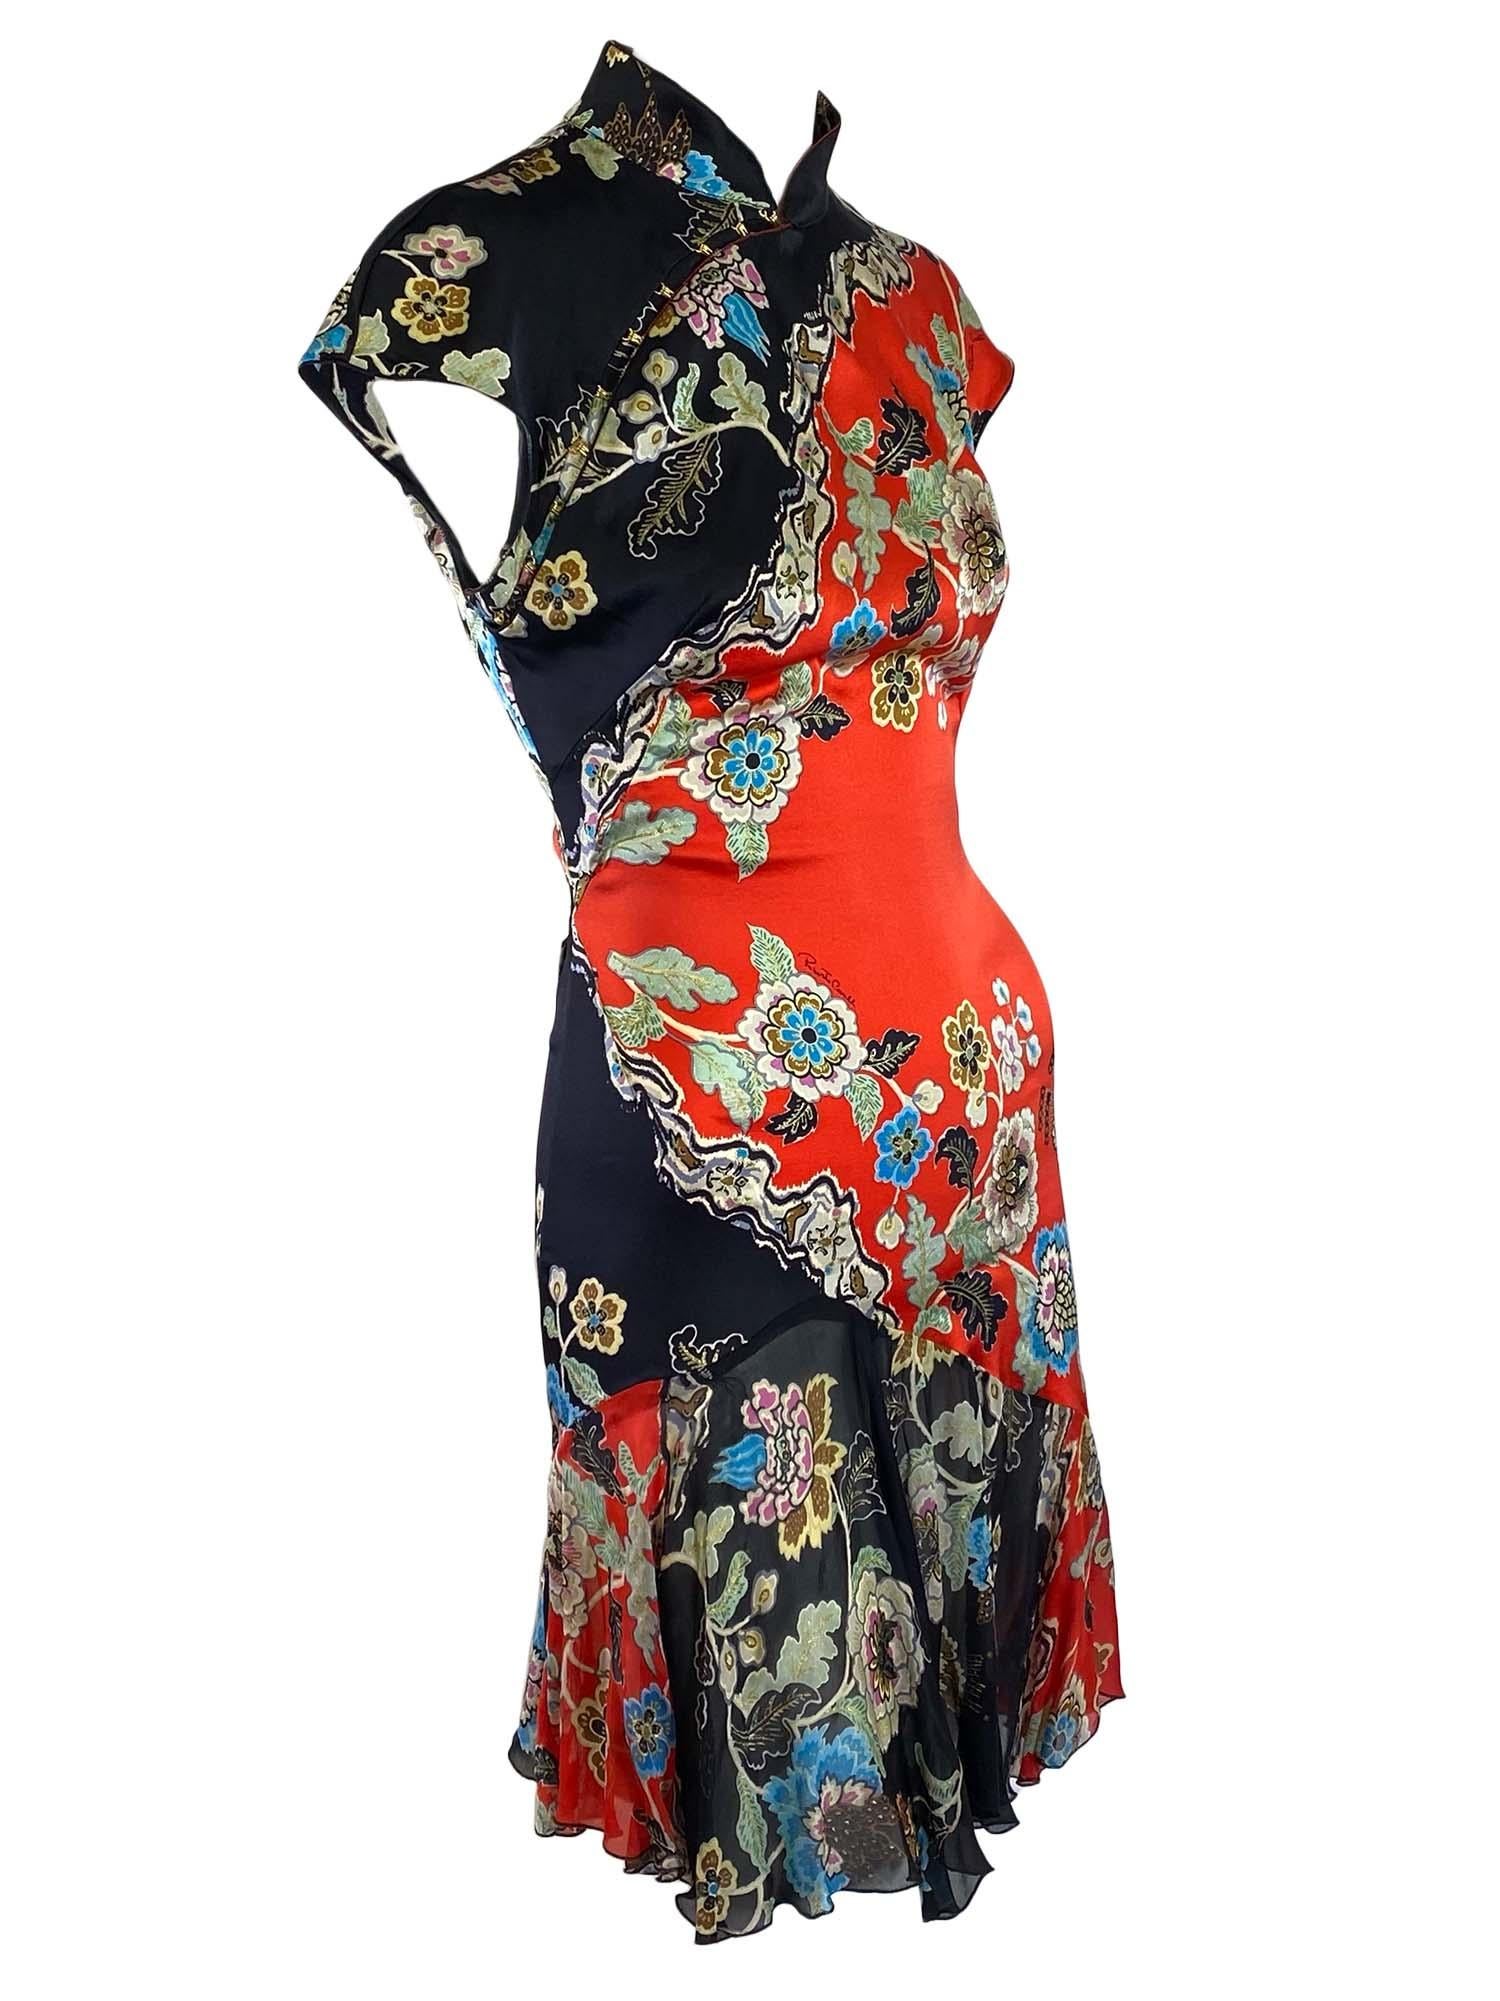 S/S 2003 Roberto Cavalli Red Chinoiserie Cheongsam Cap Sleeve Dress Backless In Excellent Condition For Sale In West Hollywood, CA